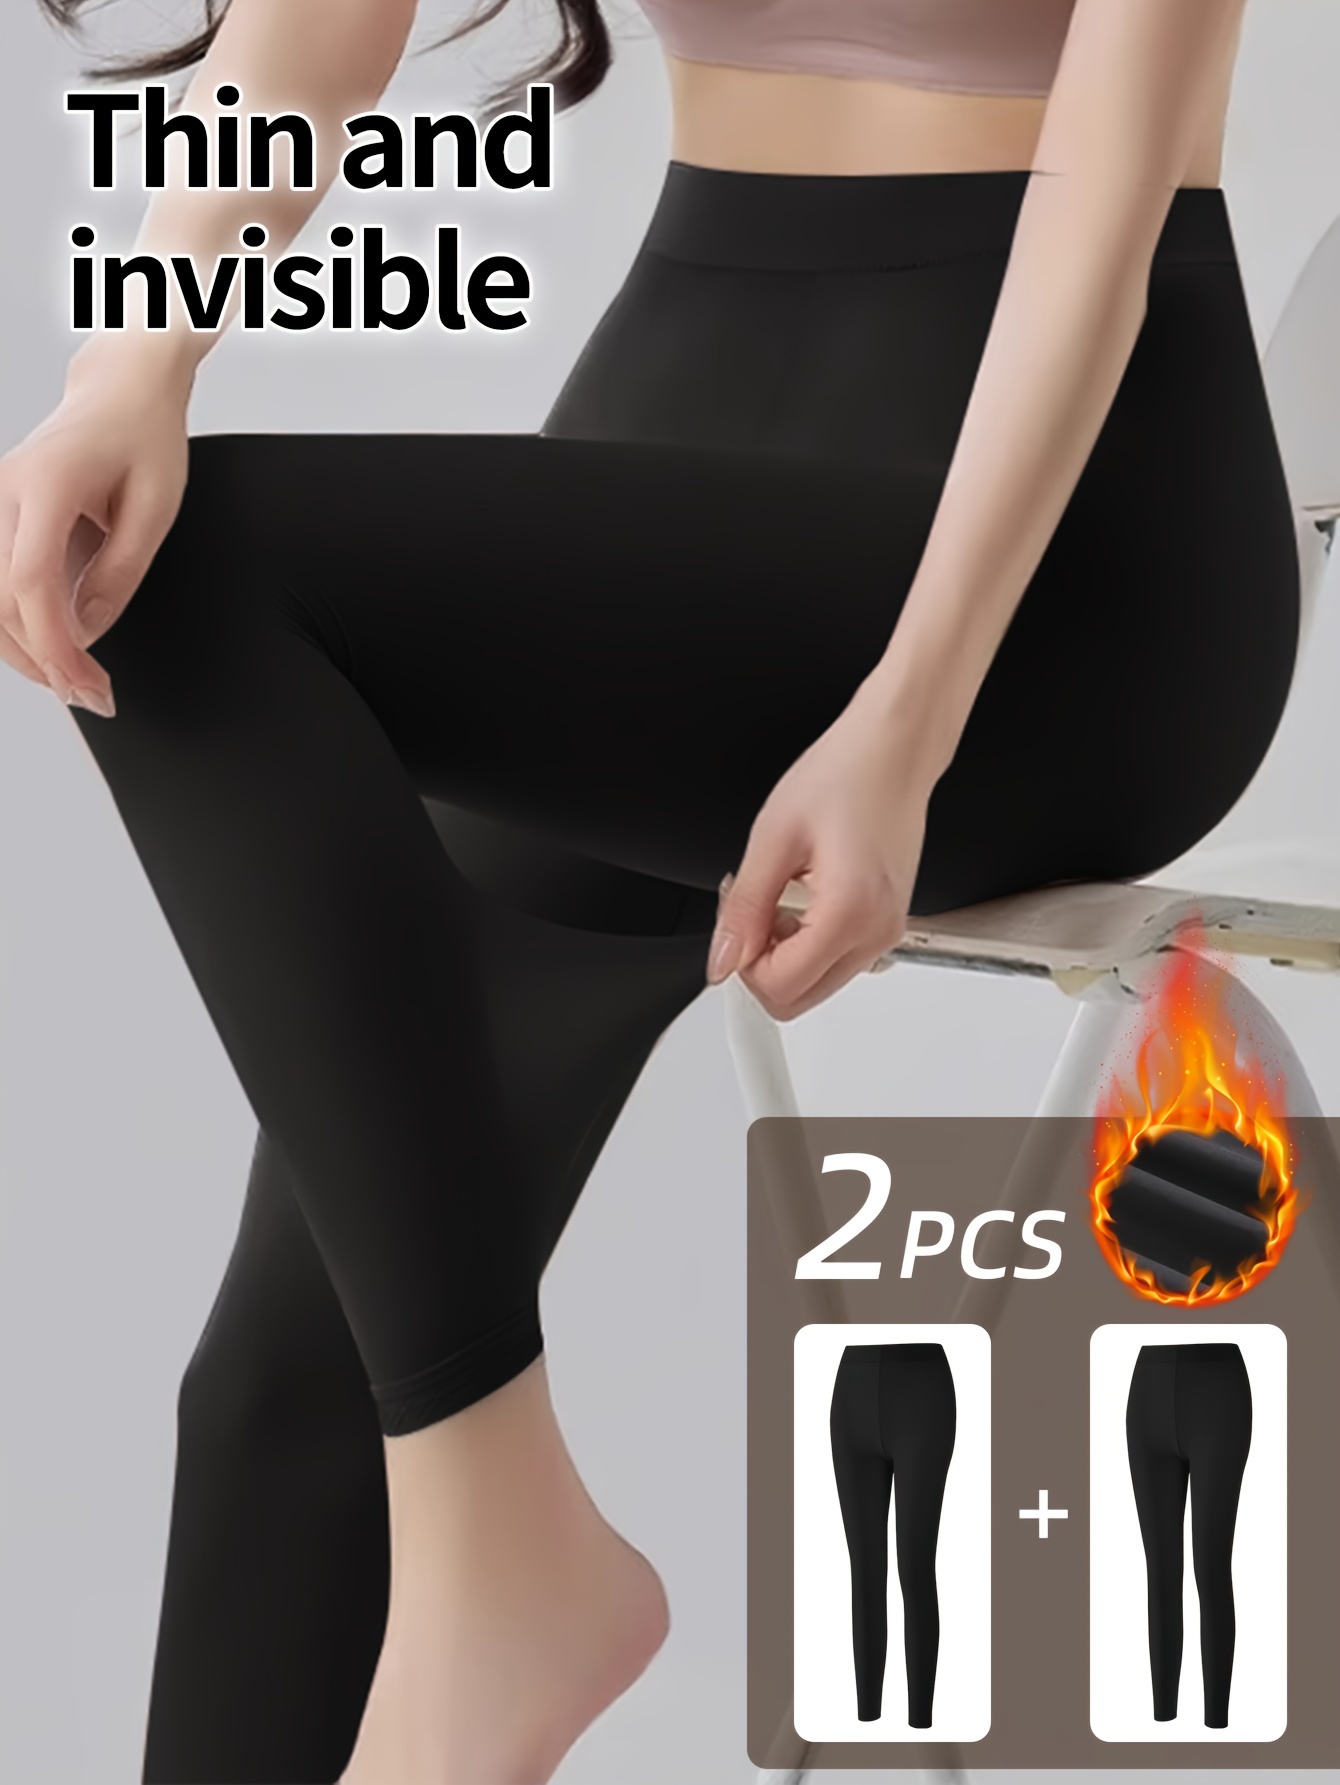 Women's Thermal Tights